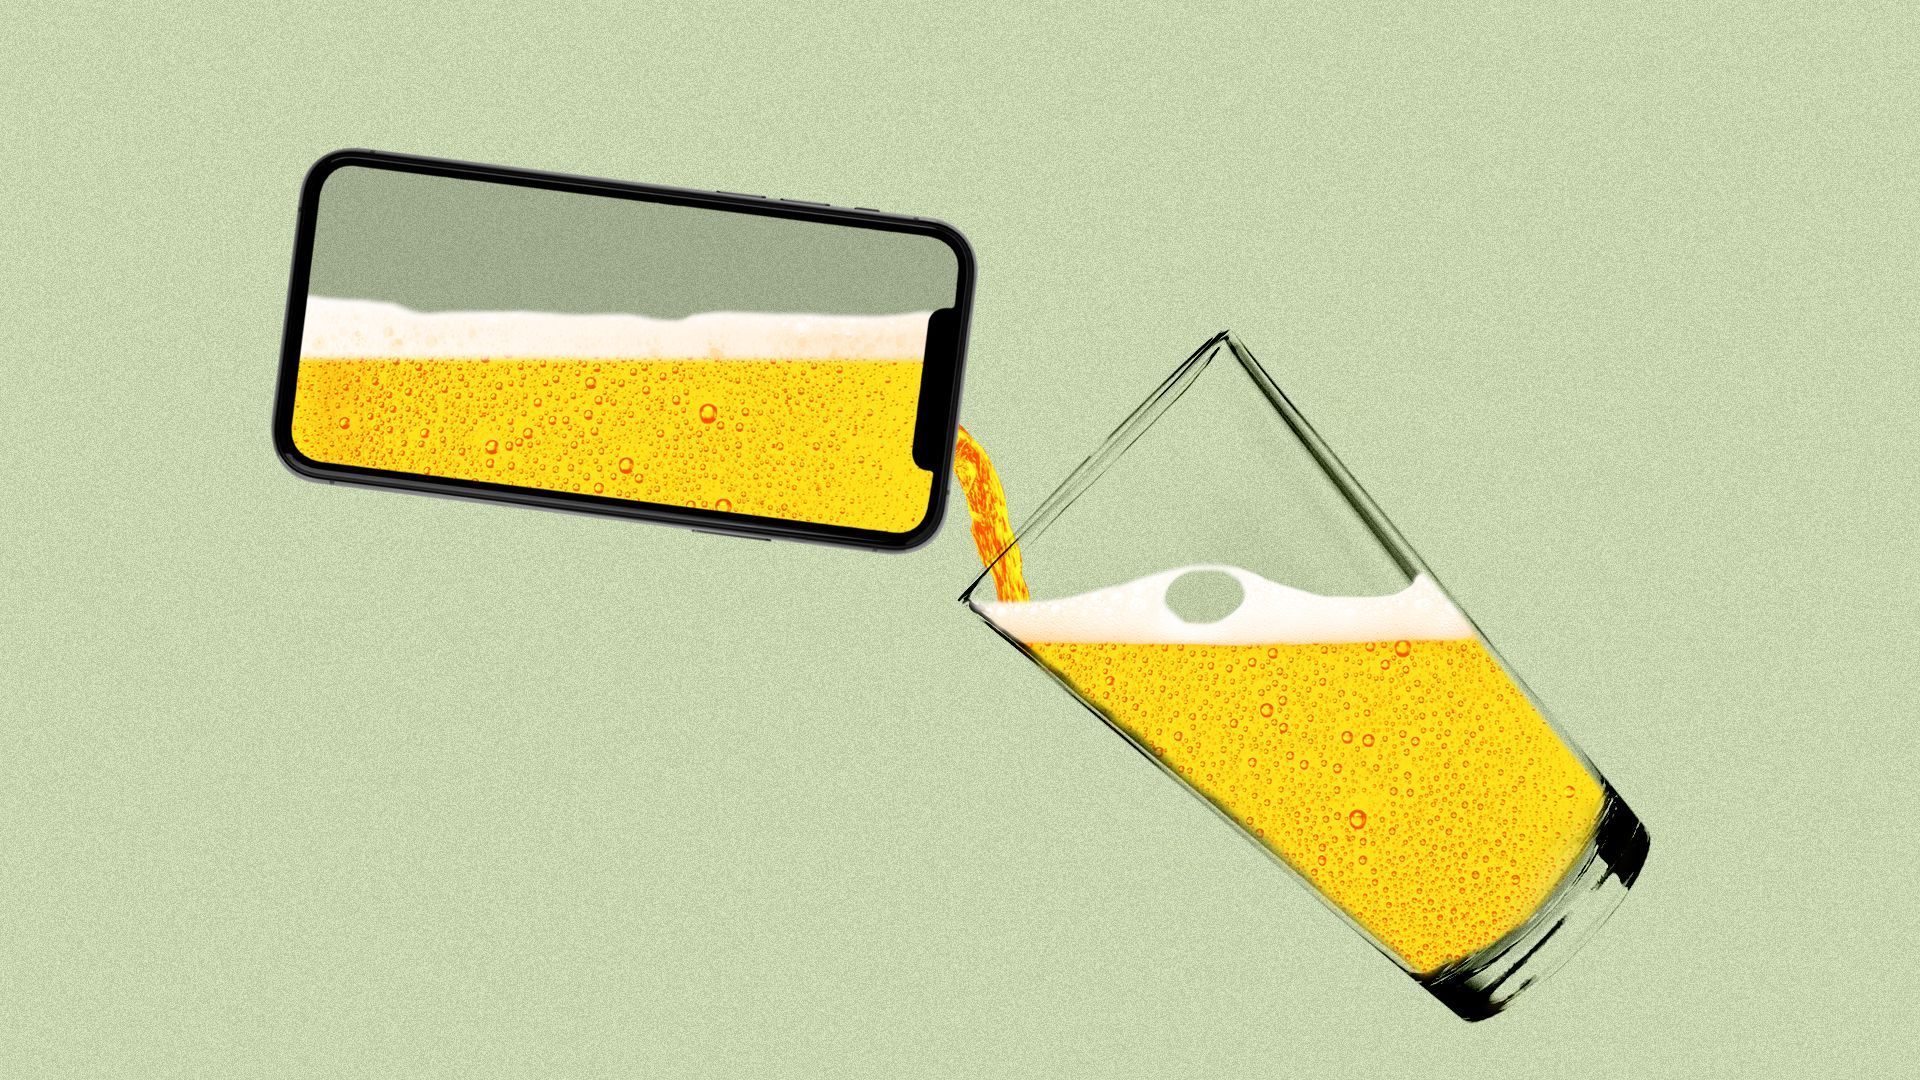 Illustration of beer pouring from a smartphone into a pint glass.